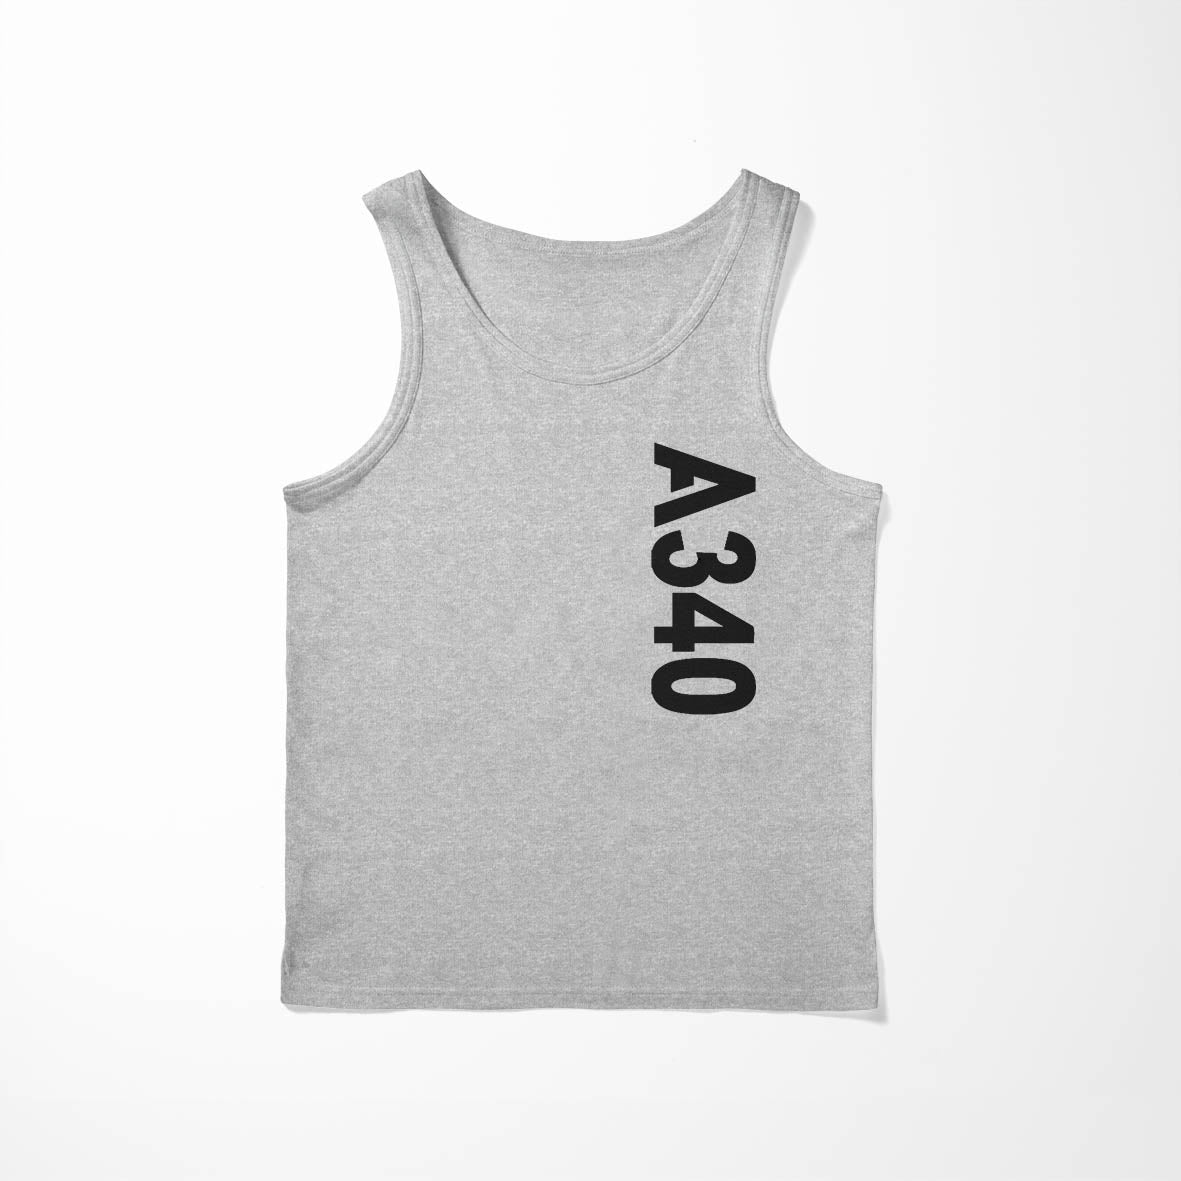 A340 Side Text Designed Tank Tops